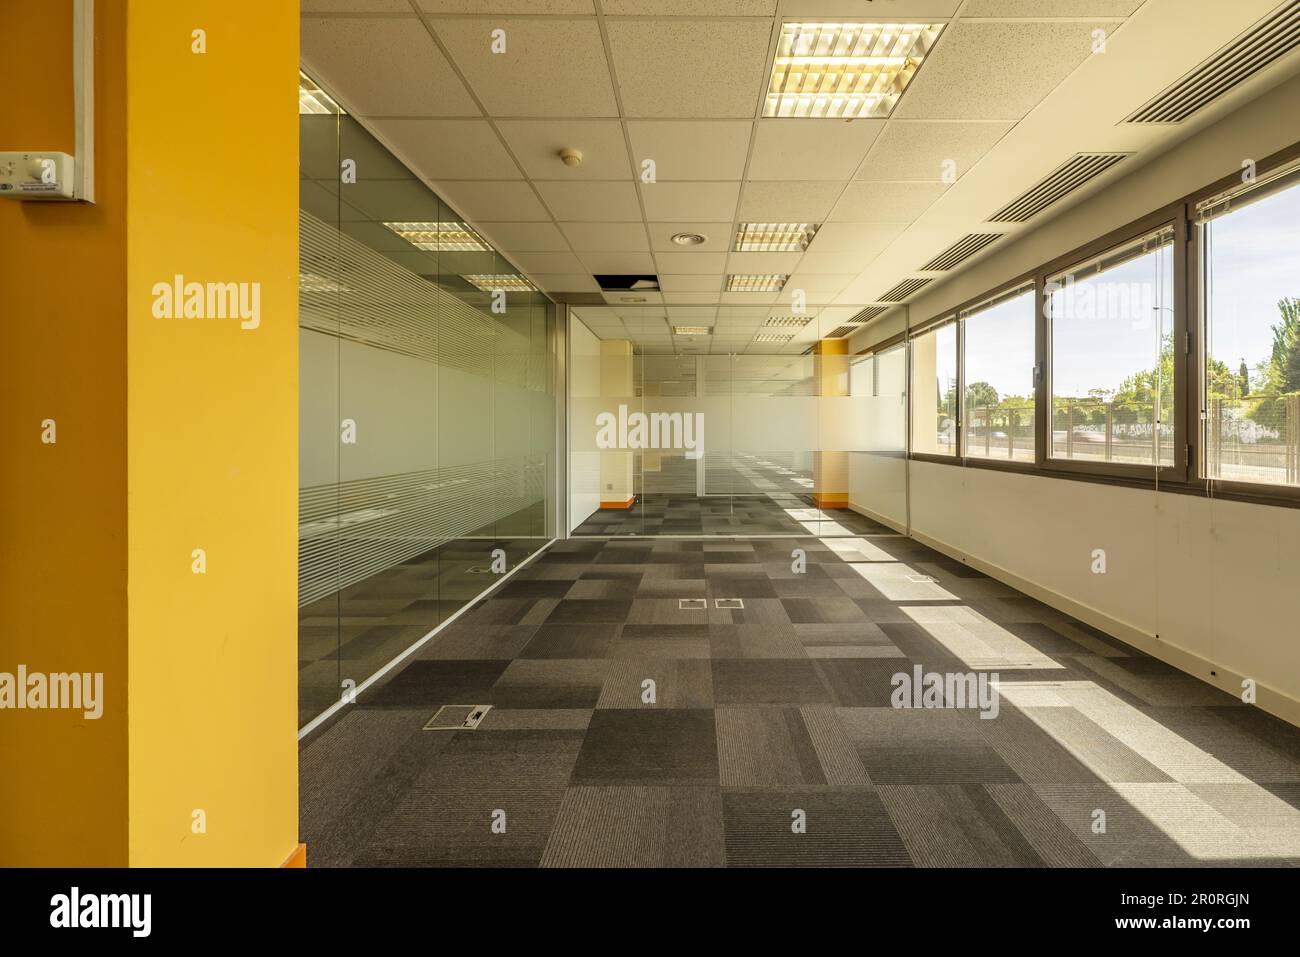 Interior of an office building with open spaces divided with tempered glass partitions and floors covered with gray carpets Stock Photo